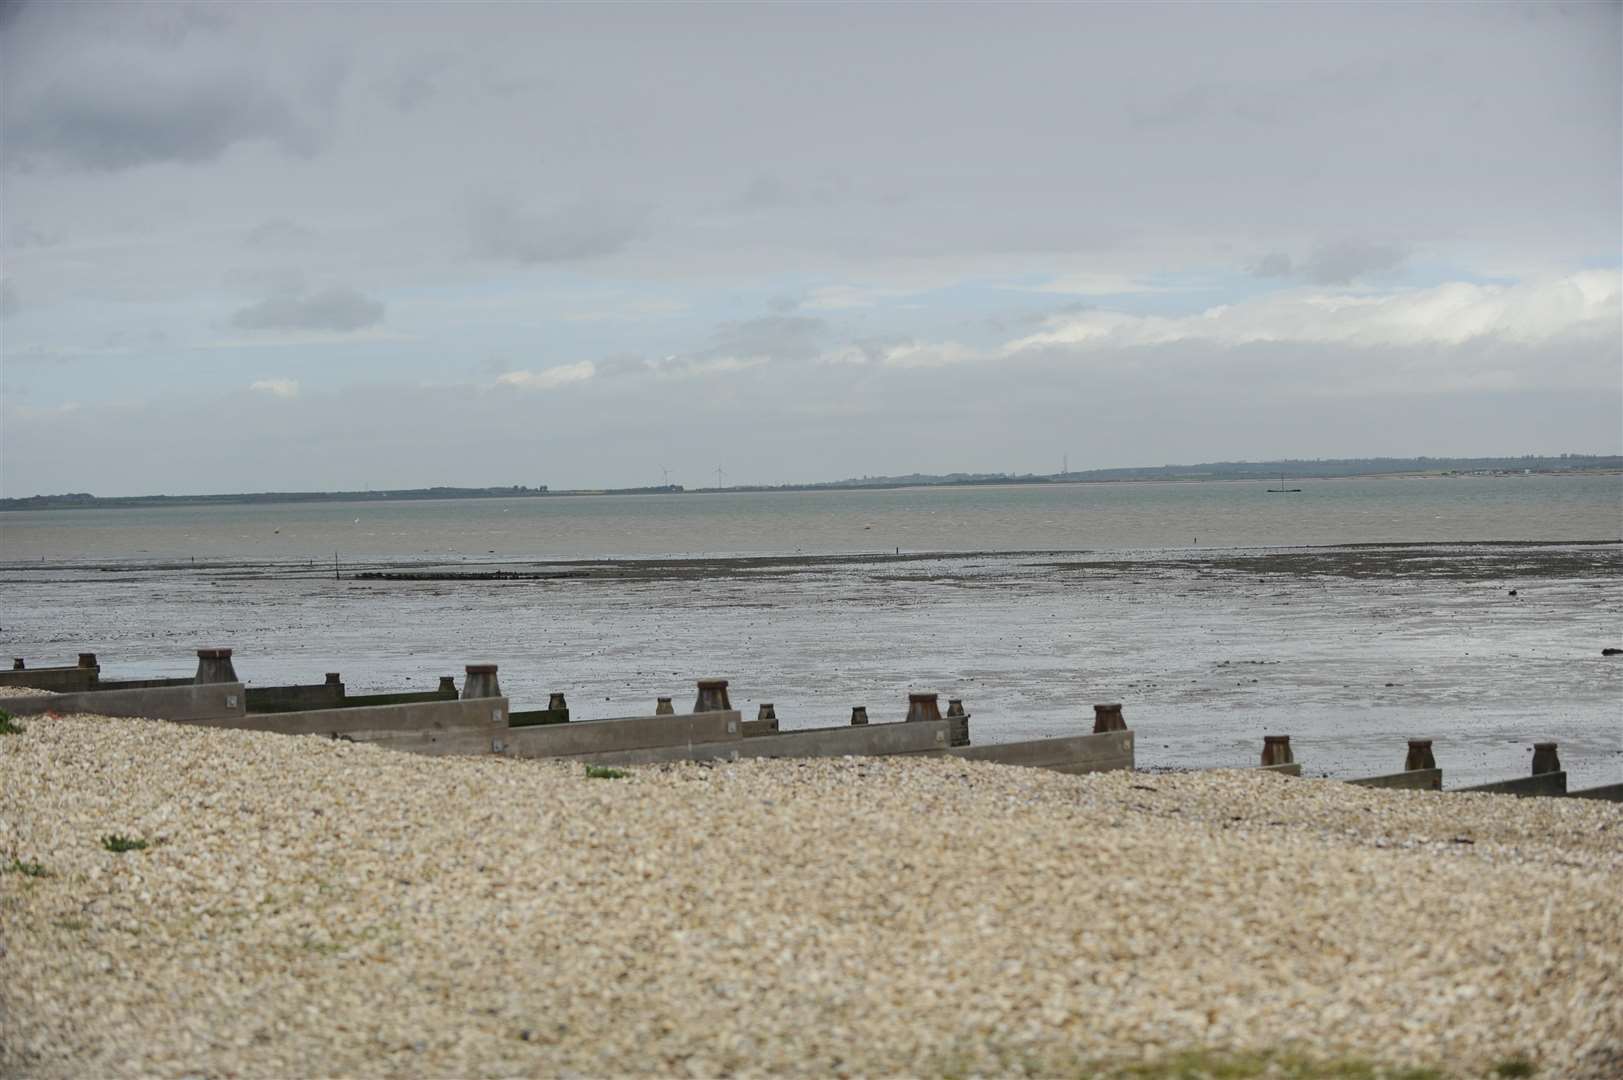 The body was found at Seasalter